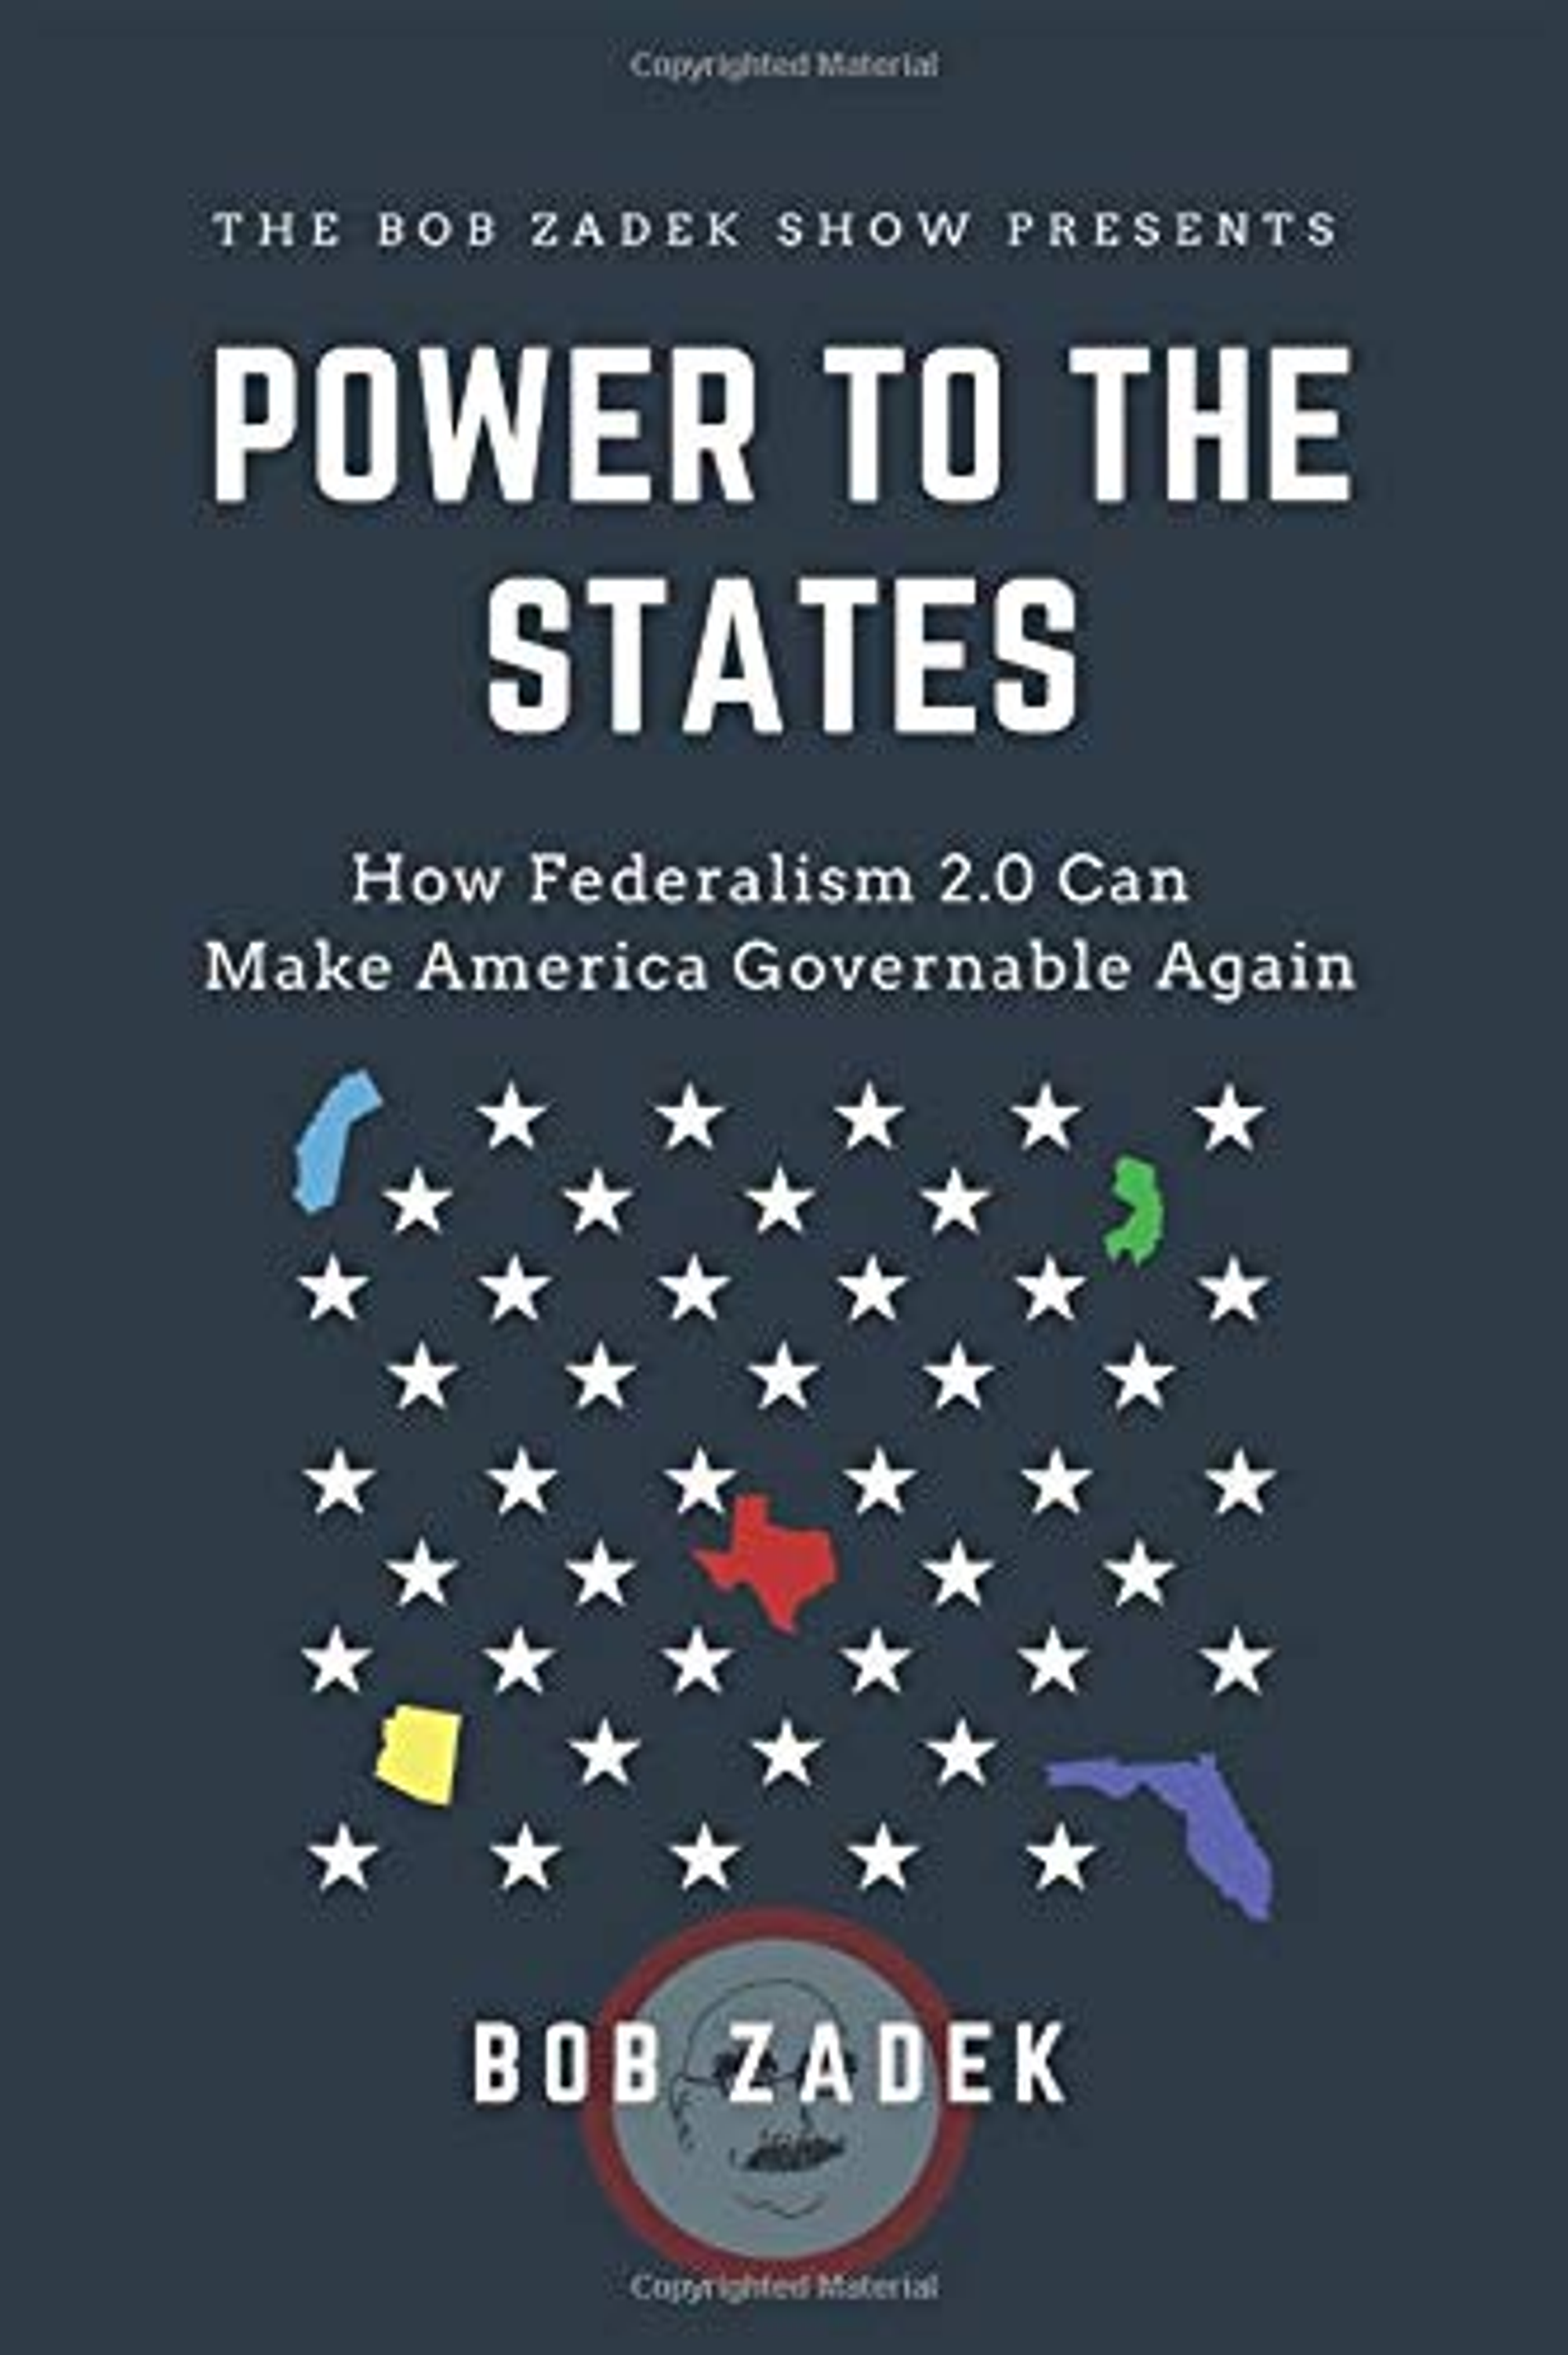 Power to the States: How Federalism 2.0 Can Make America Governable Again